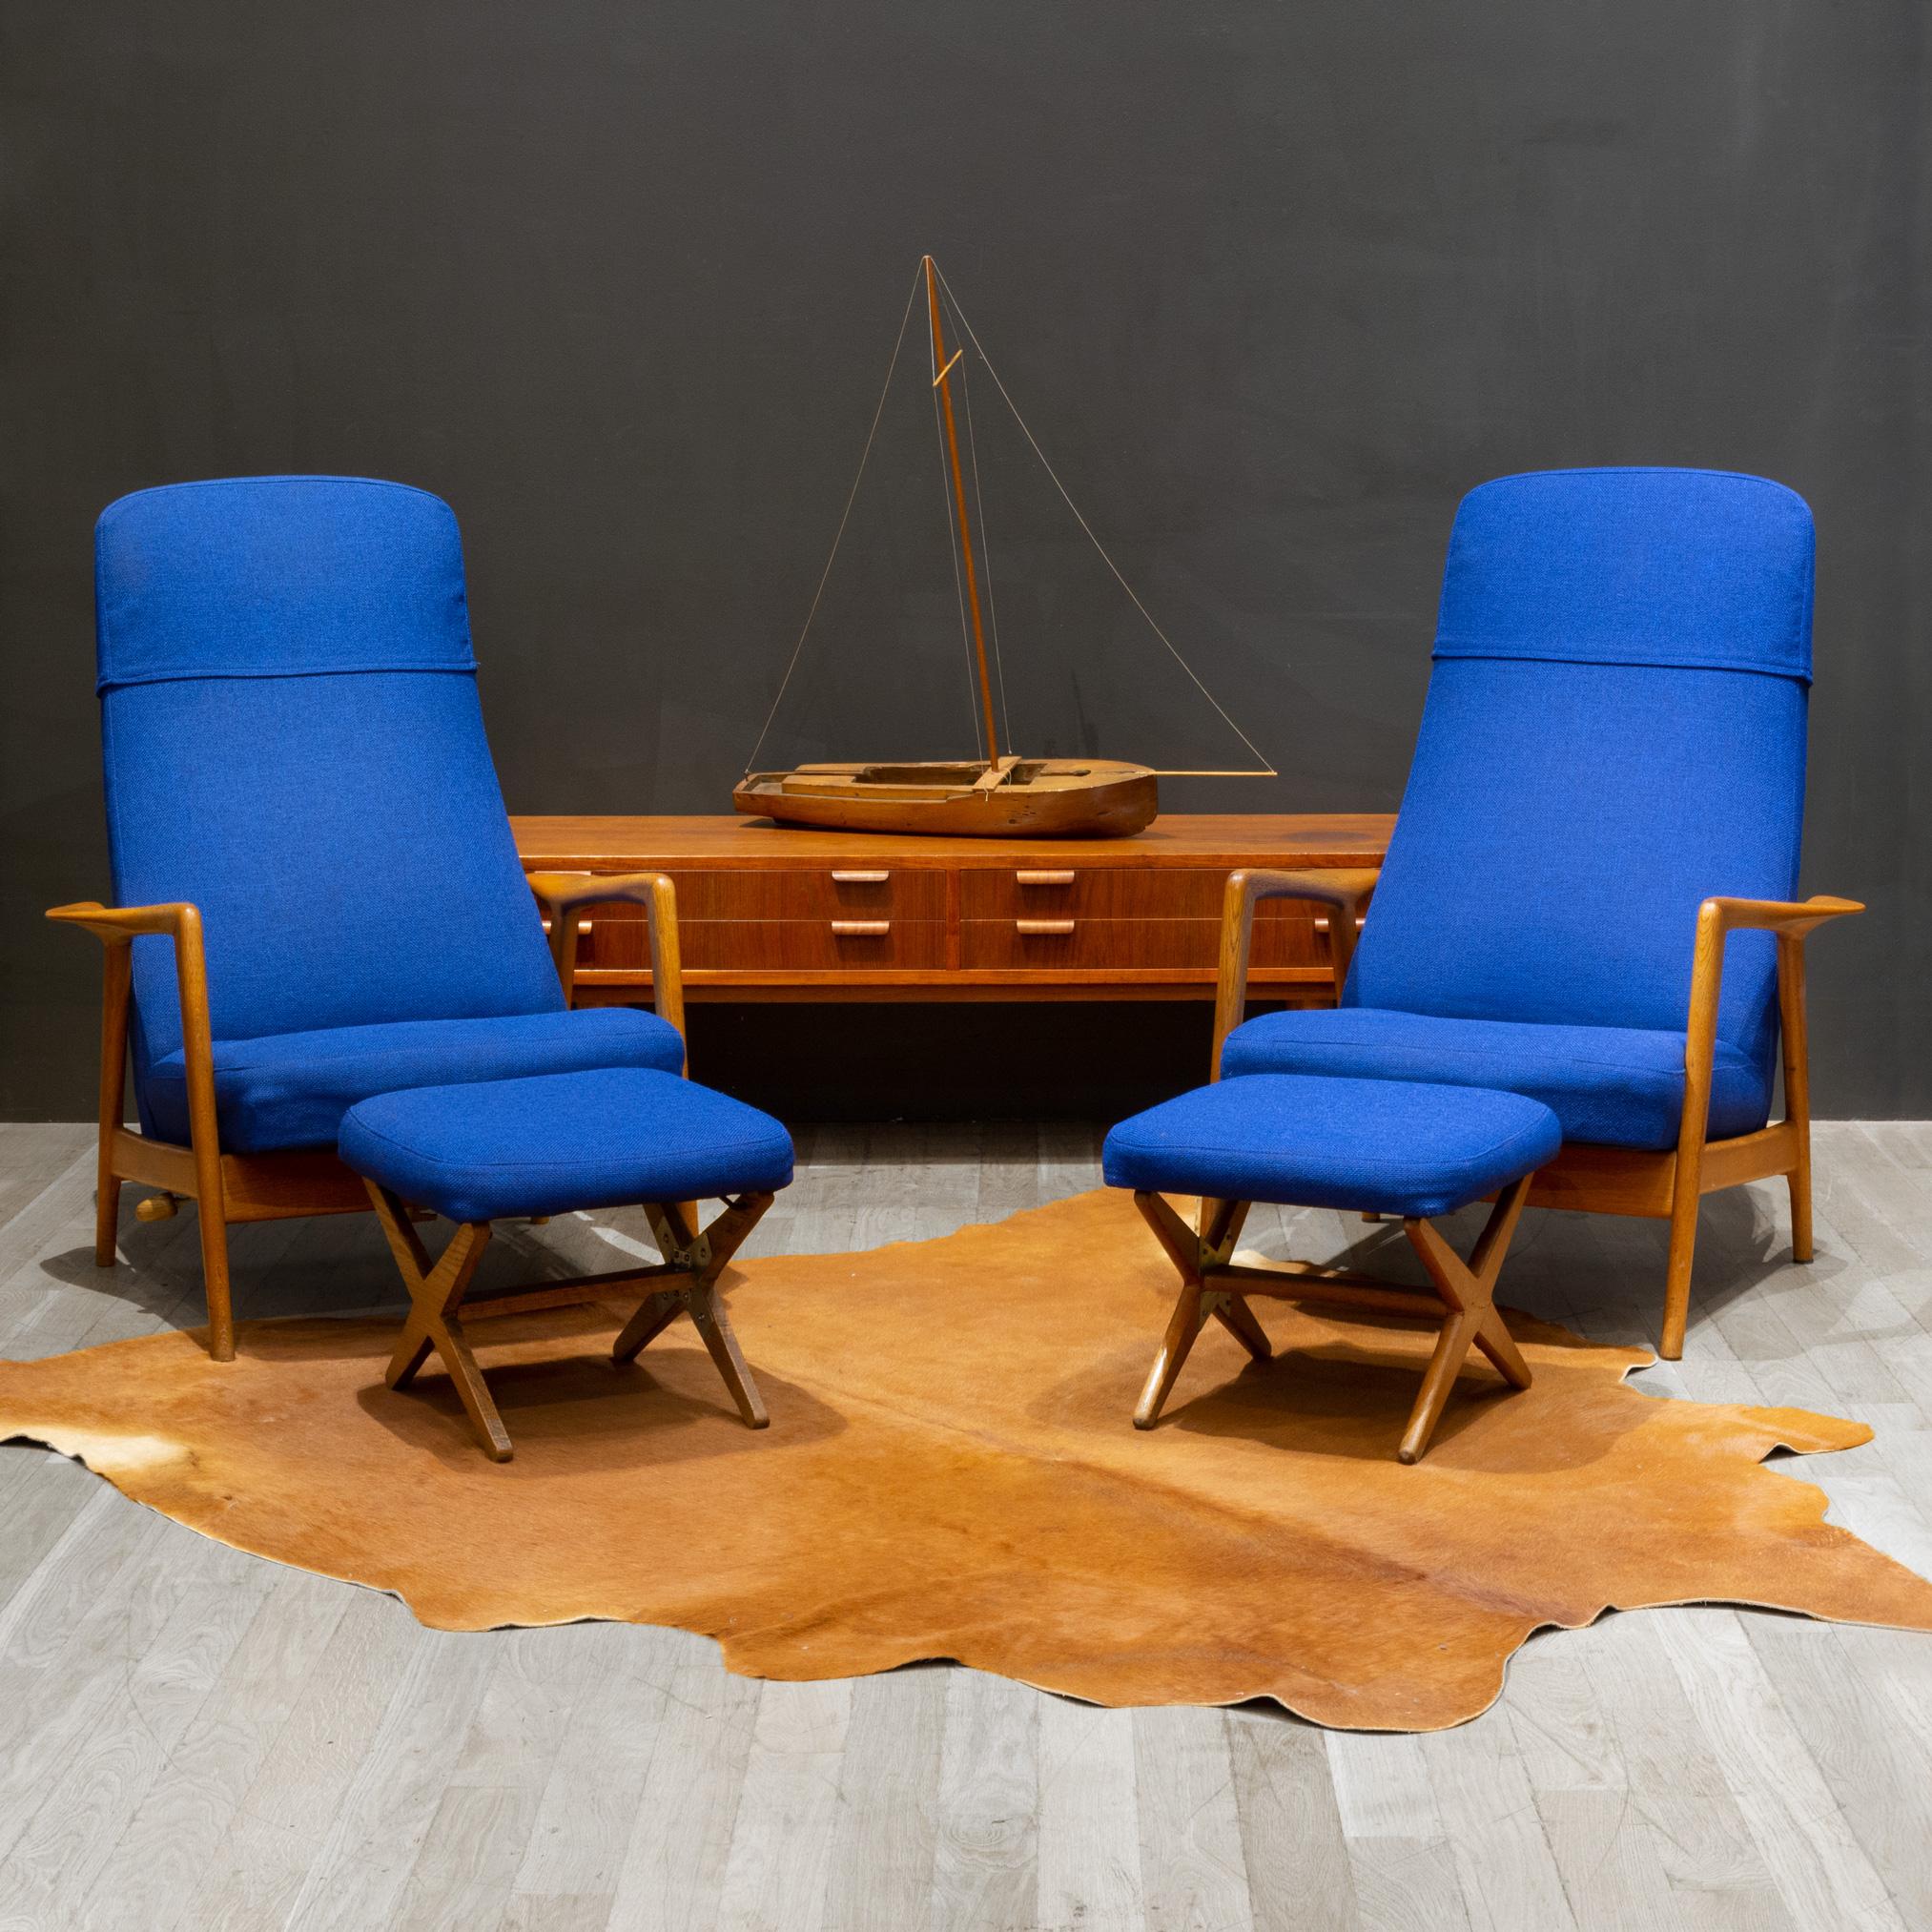 ABOUT

An original pair of Folke Ohlsson for DUX Teak reclining lounge chairs with adjustable ottomans. This sculptural chair features a spring tension mechanism that allows for rocking motion and different locking reclining positions. The